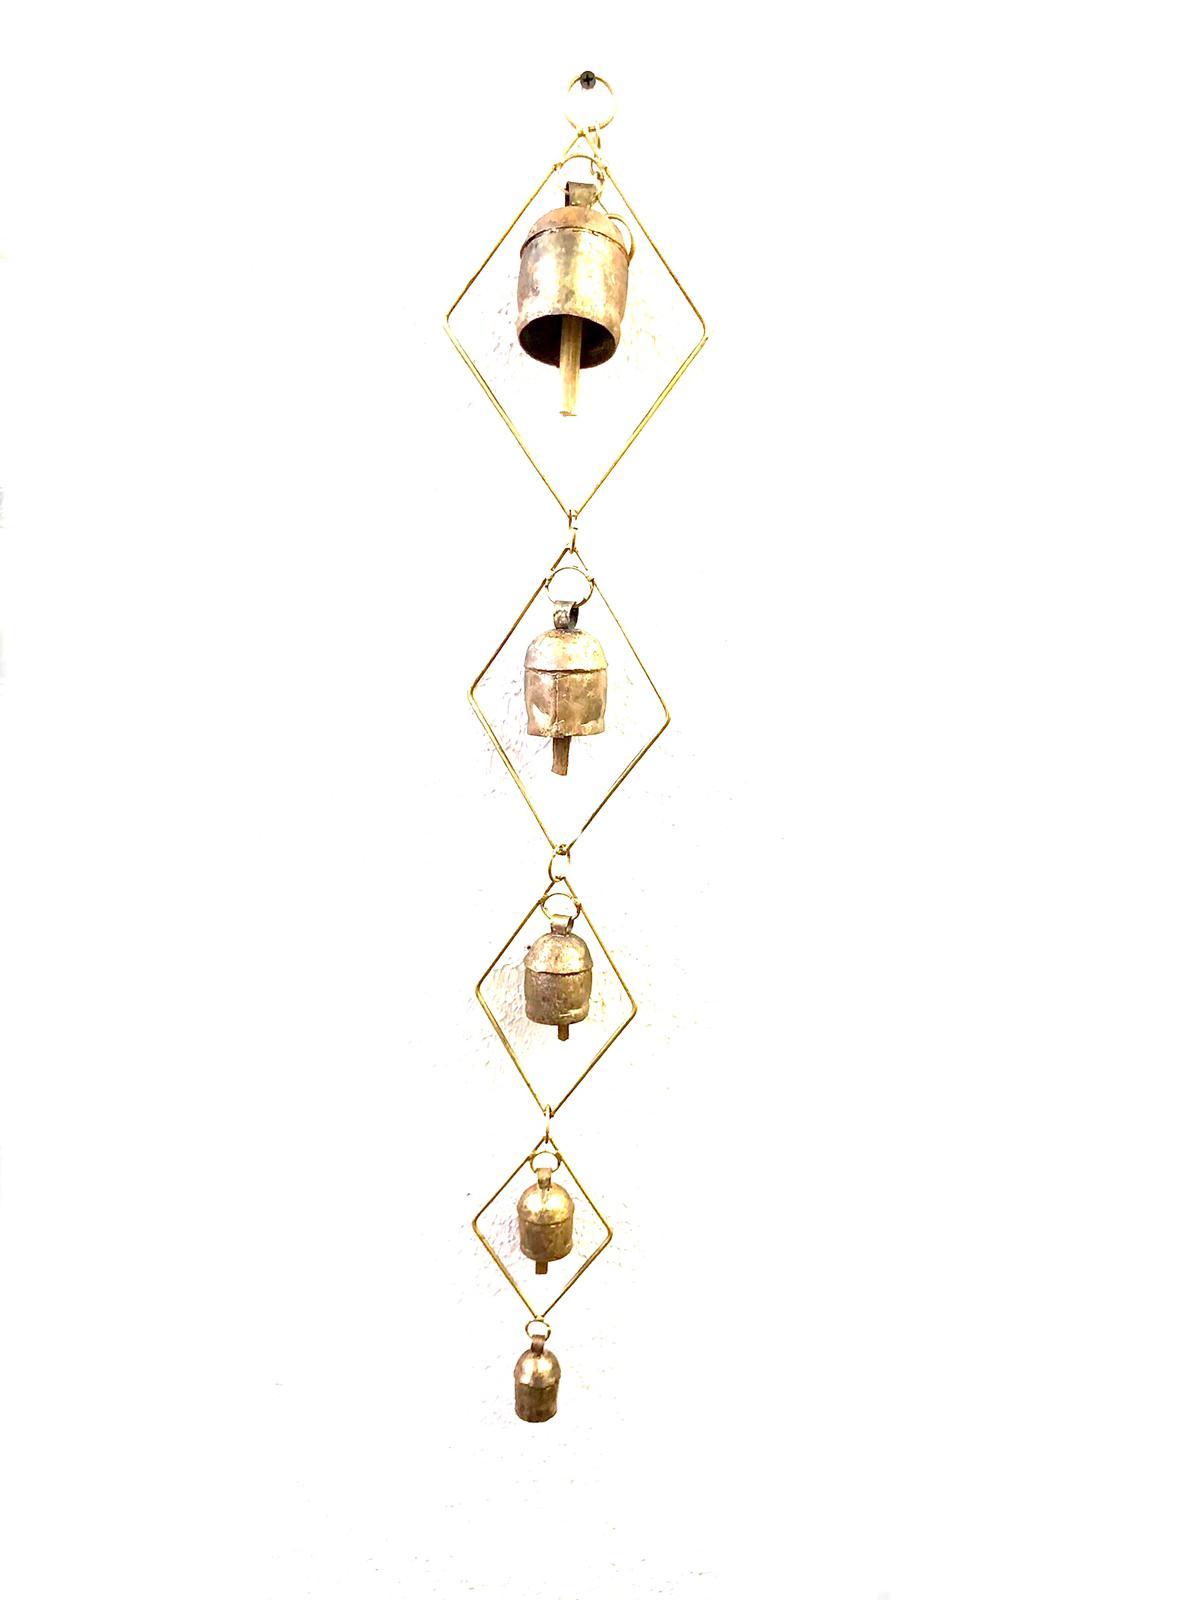 Ringing Wind Chimes In Classy Designs Extraordinary Metal Art By Tamrapatra